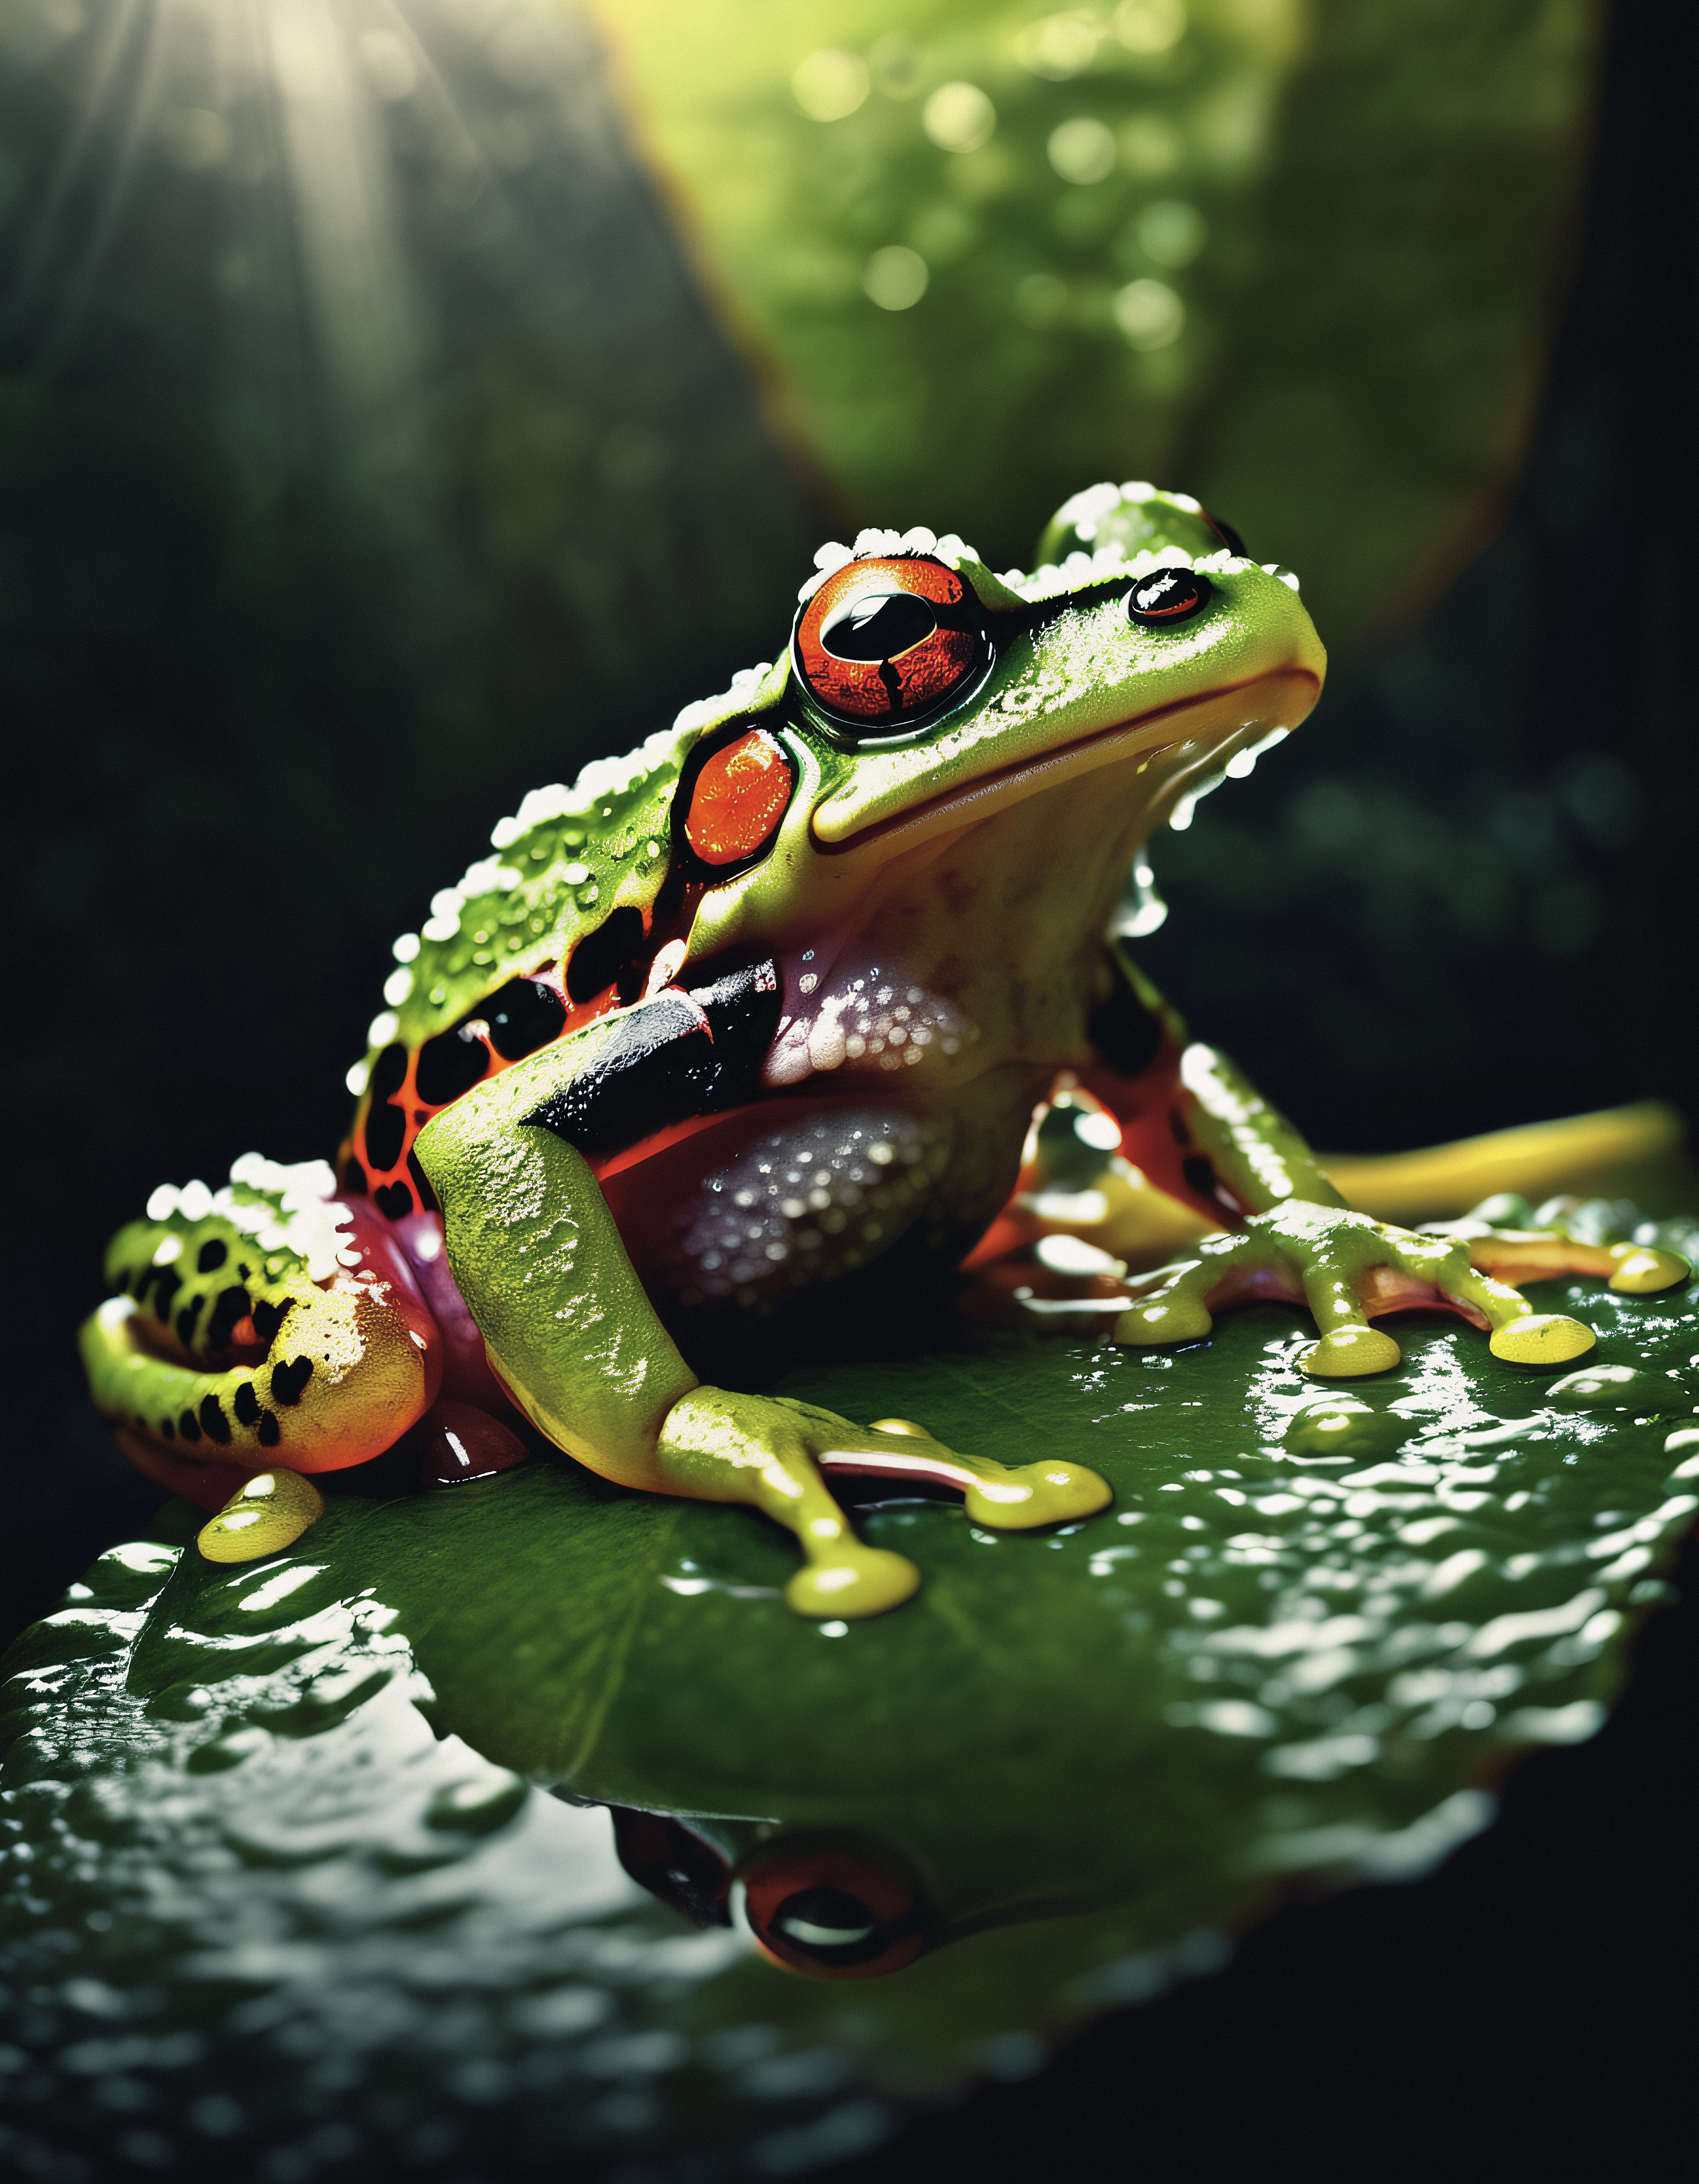 A green and red frog with yellow spots sits on a leaf.